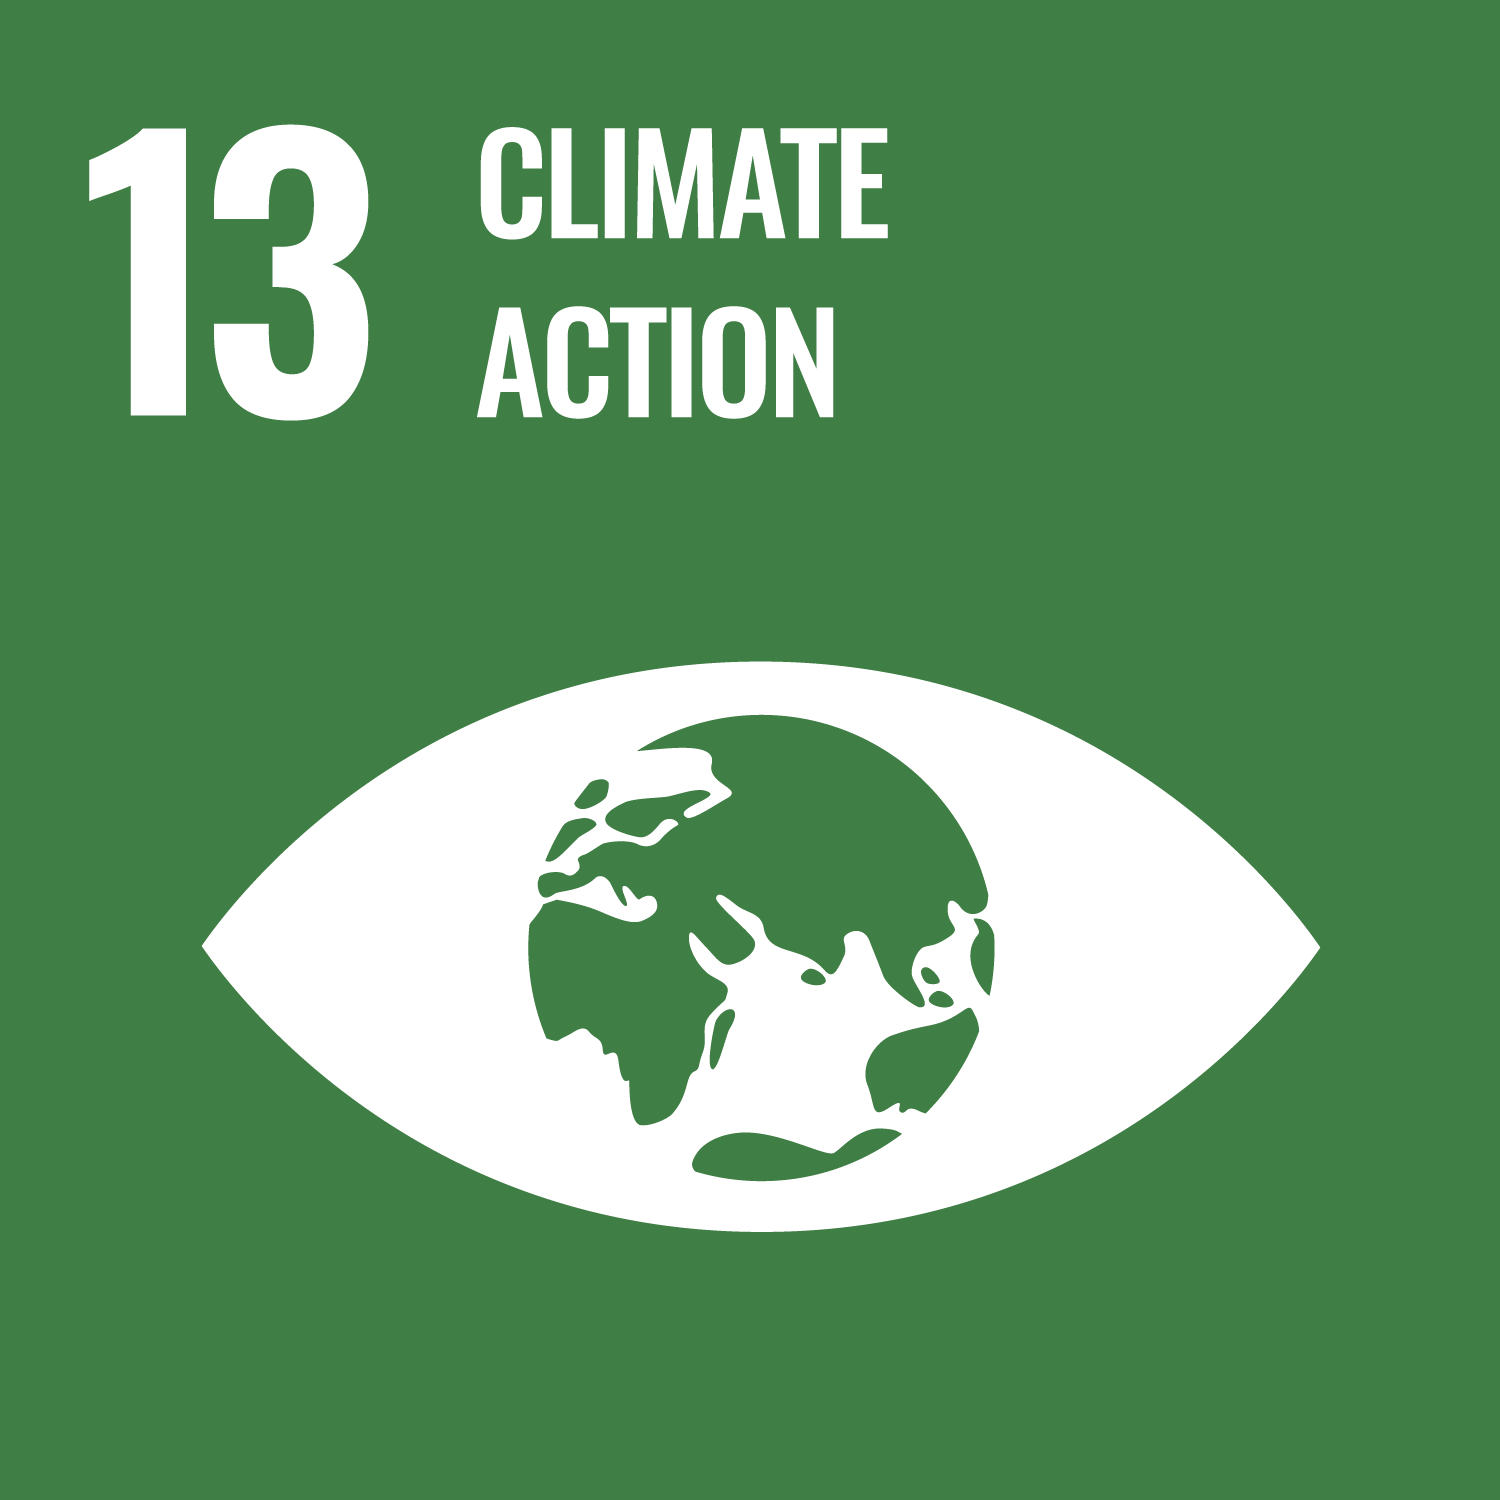 Sustainable Development Goal Graphic for Climate Action